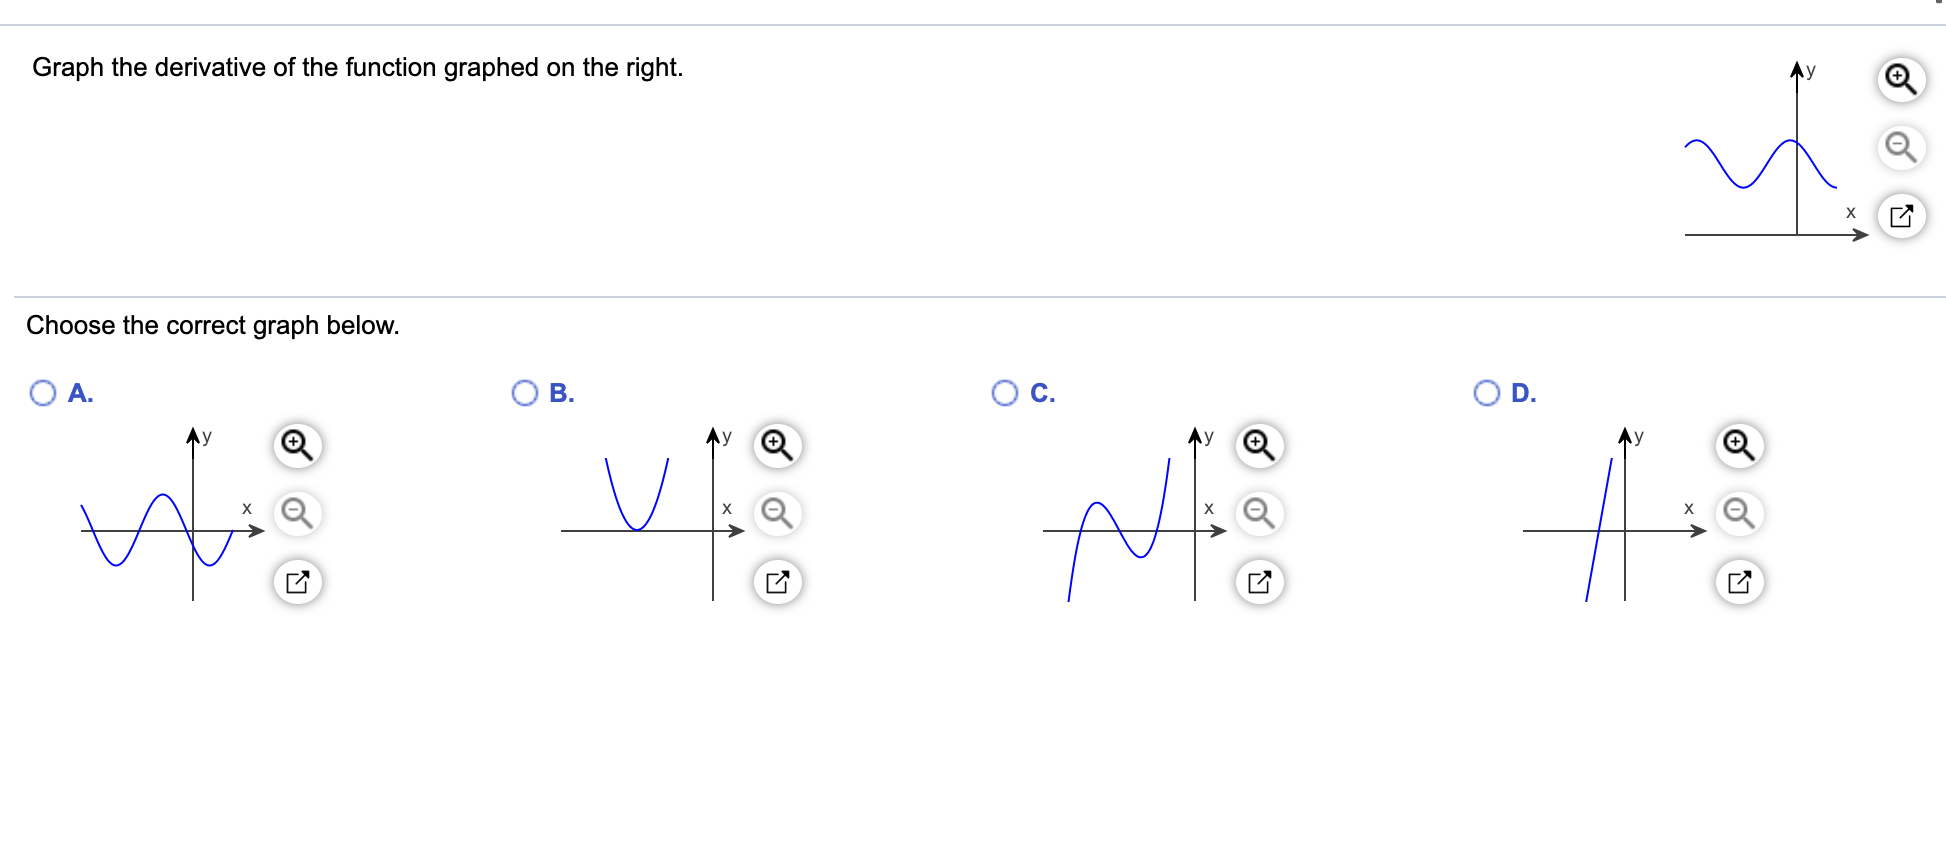 Graph the derivative of the function graphed on the right.
х
Choose the correct graph below.
O A.
B.
Ay
